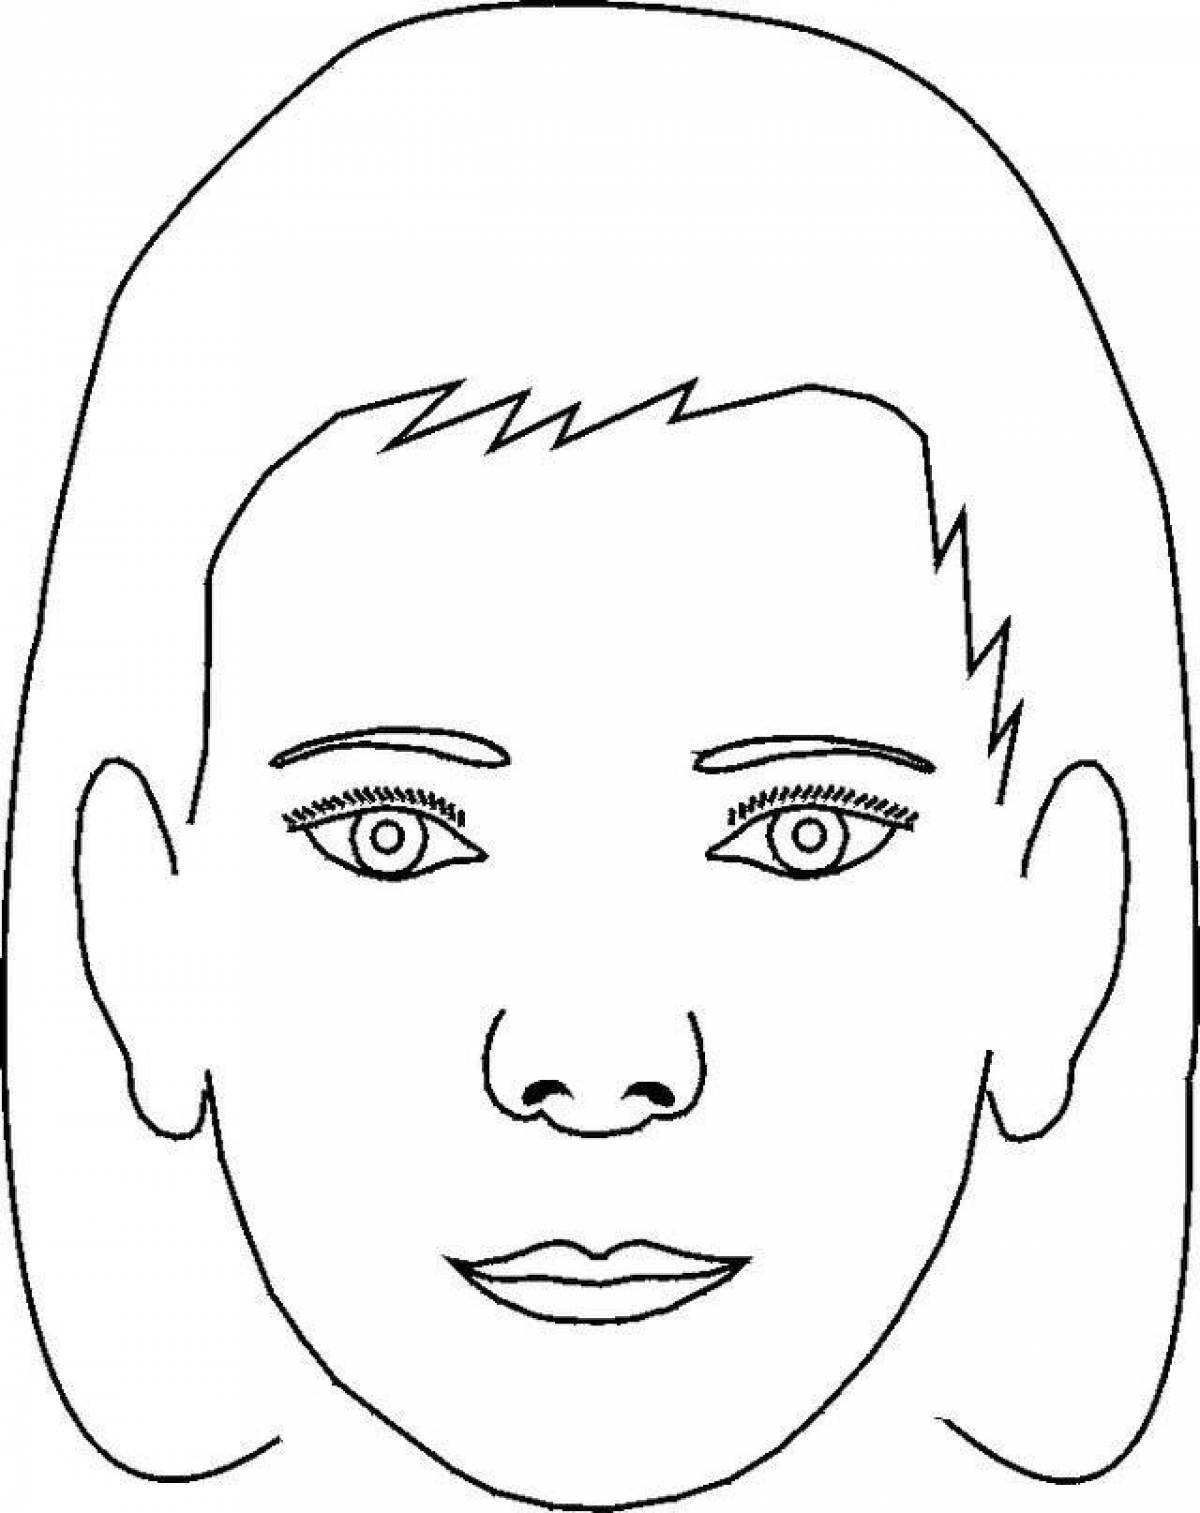 Coloring page charming human face